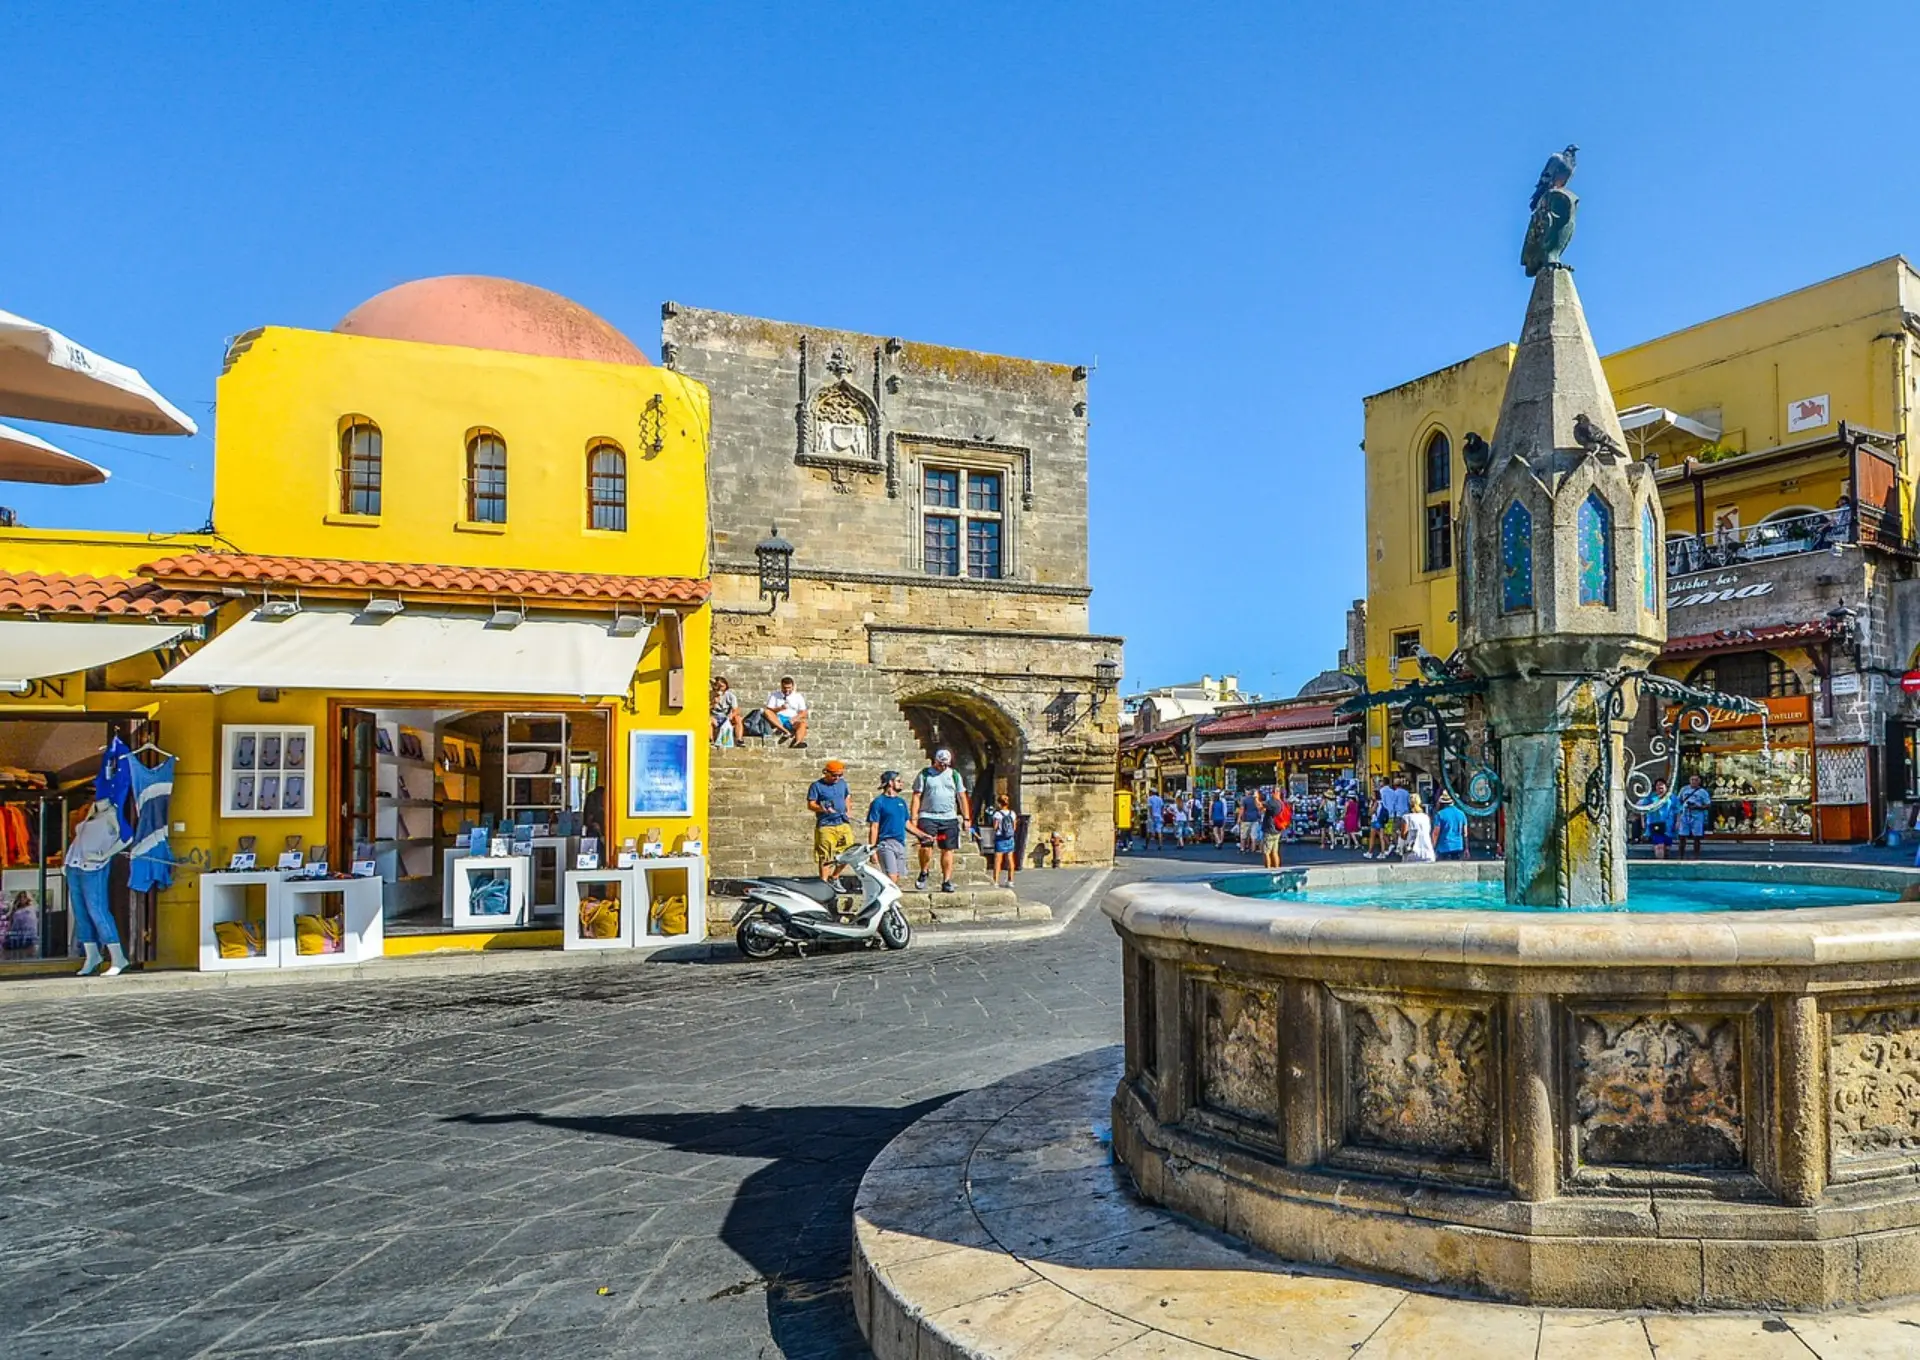 Here are 10 great tips for first-time visitors to Rhodes